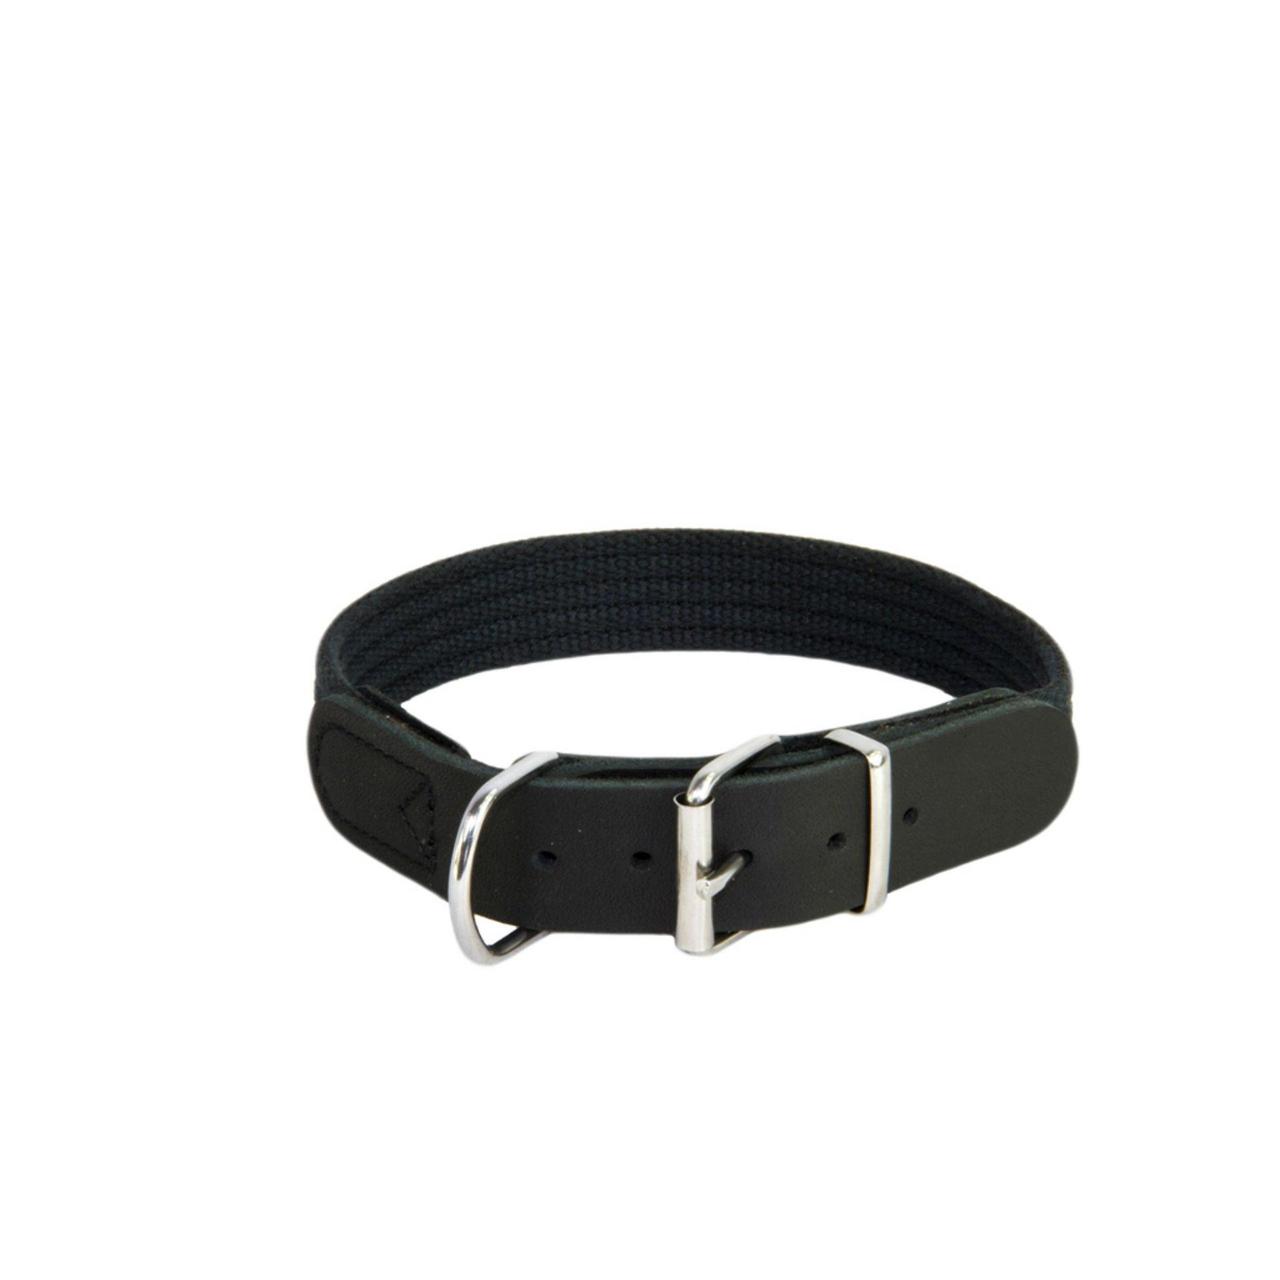 An image of Earthbound Cotton Black Collar 31 - 37cm